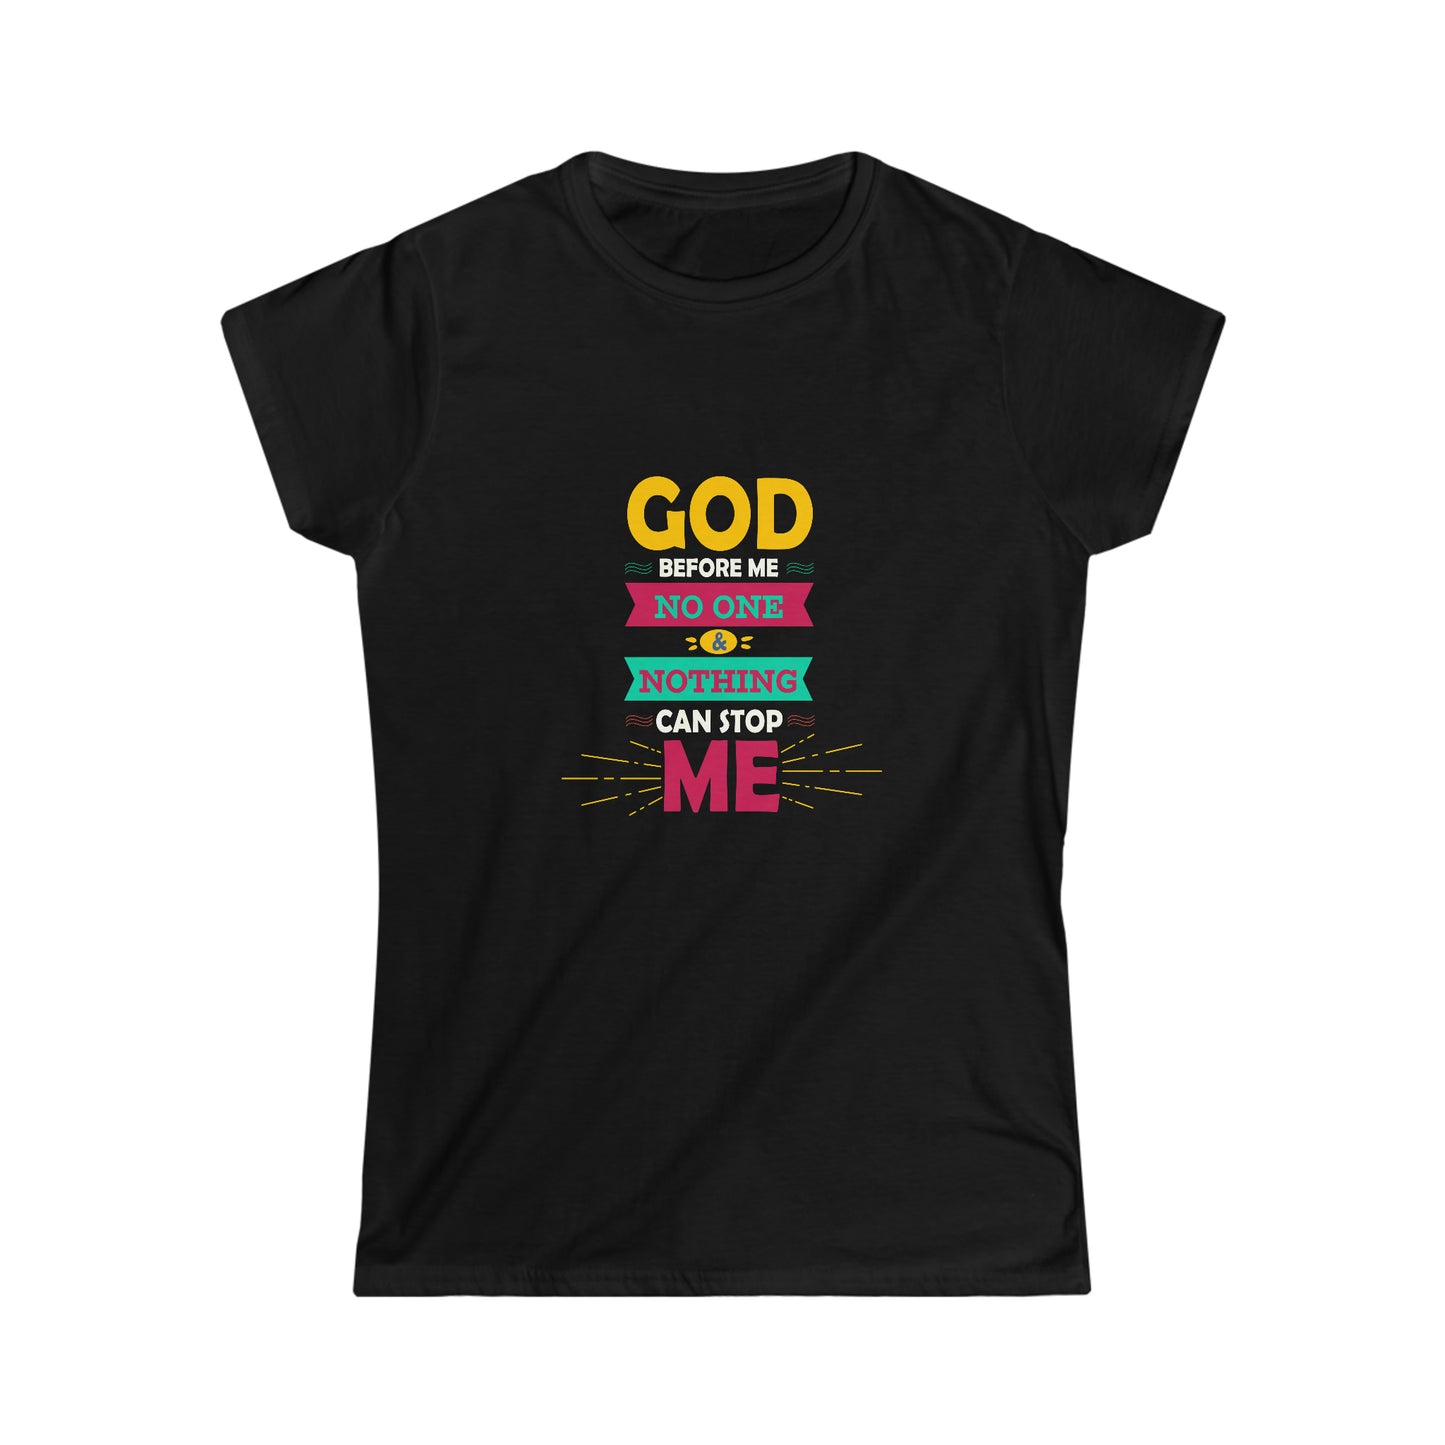 God Before Me No One & Nothing Can Stop Me Women's T-shirt